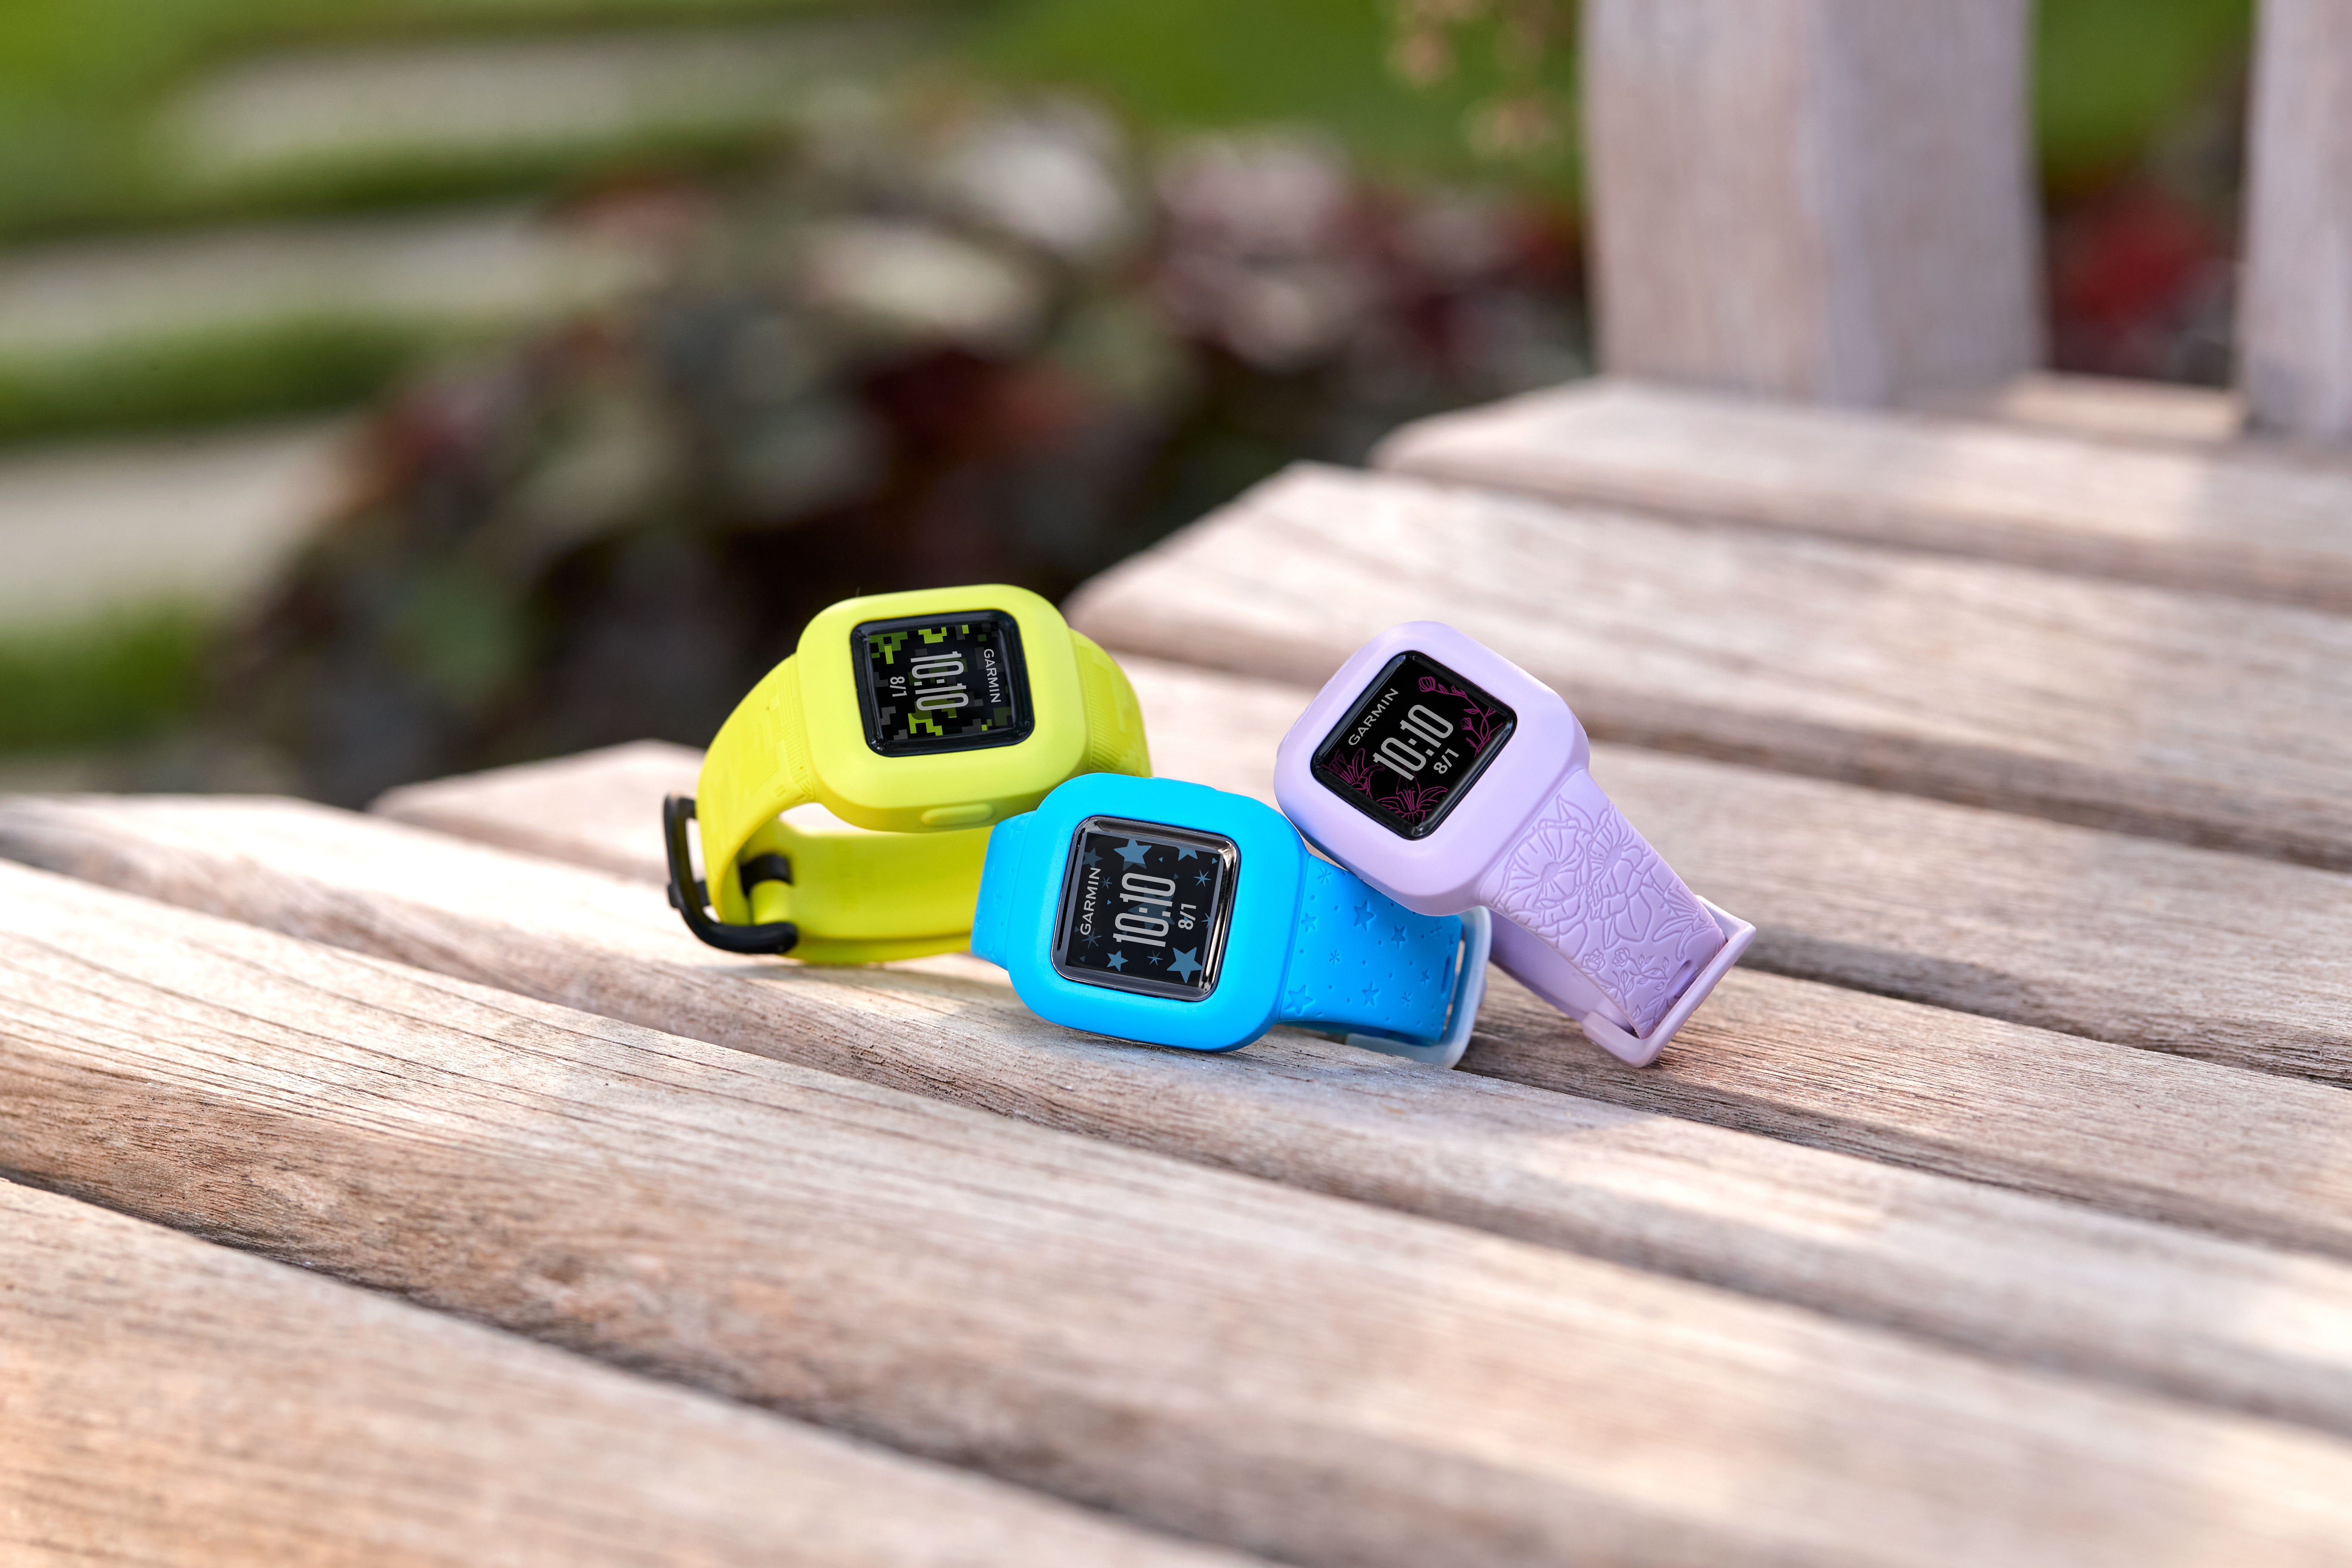 Garmin adds fun to exercise and chore time with the vívofit jr. 3